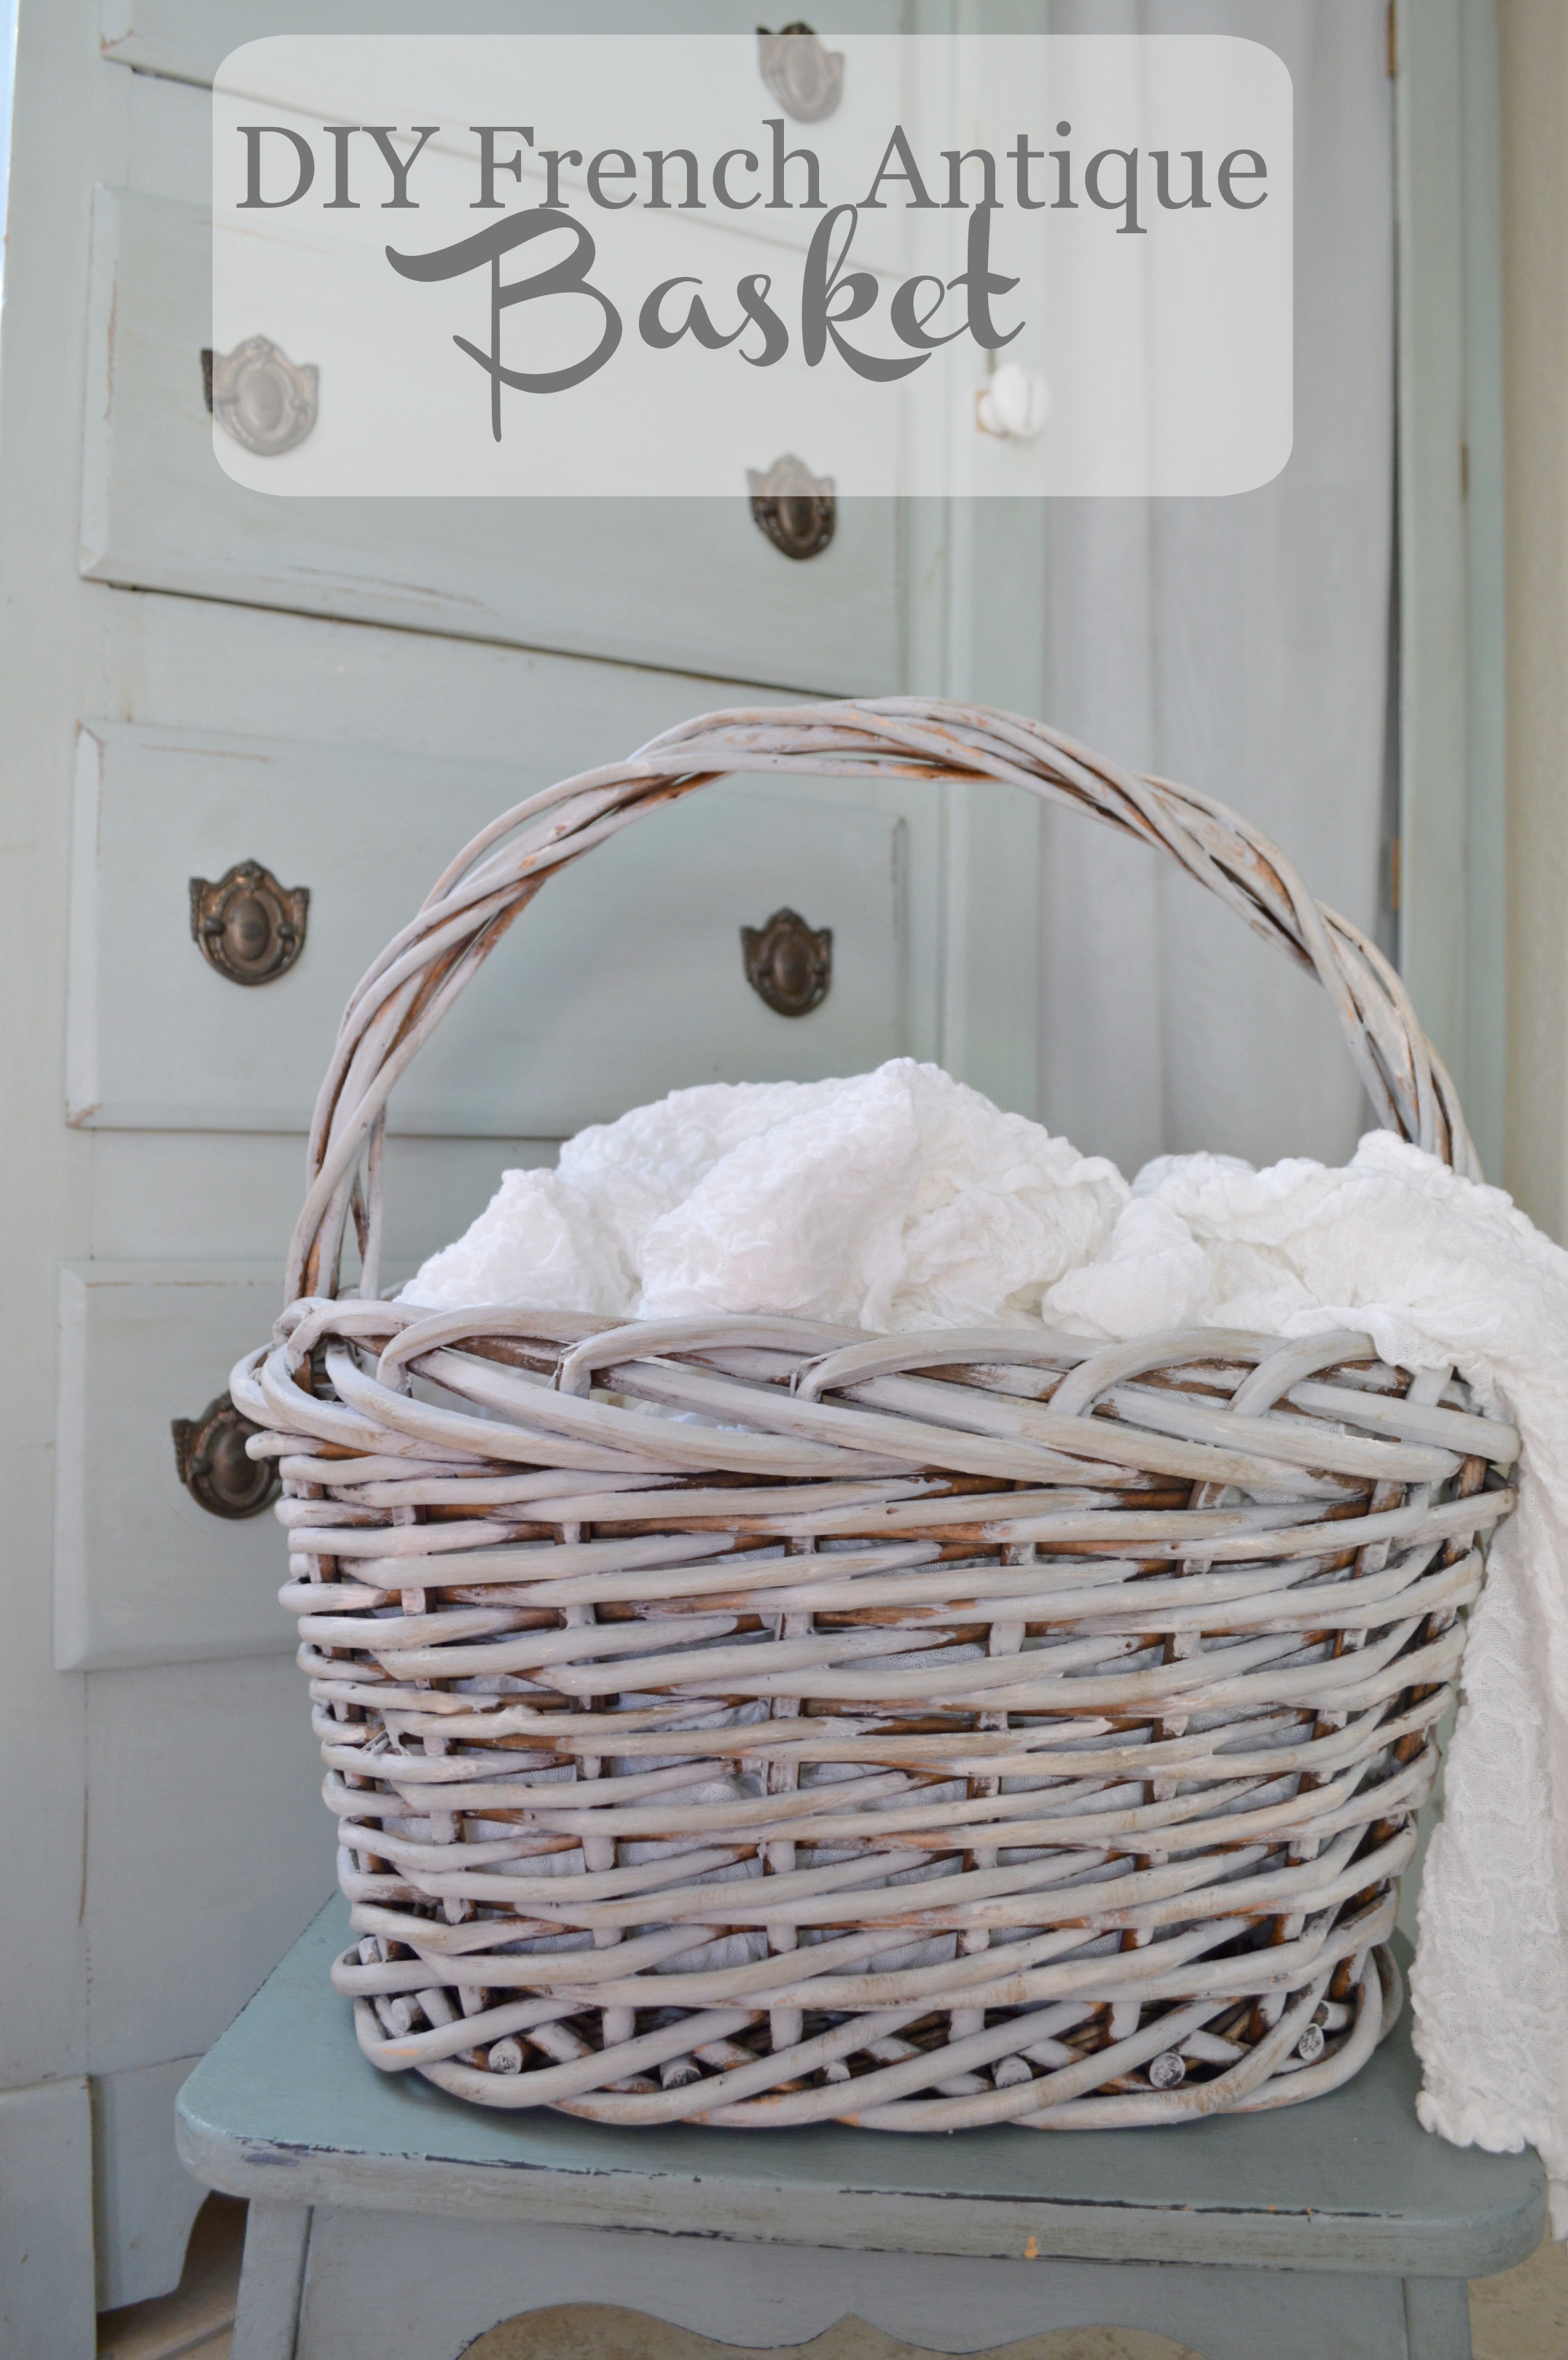 Make a brown basket look like a french antique basket